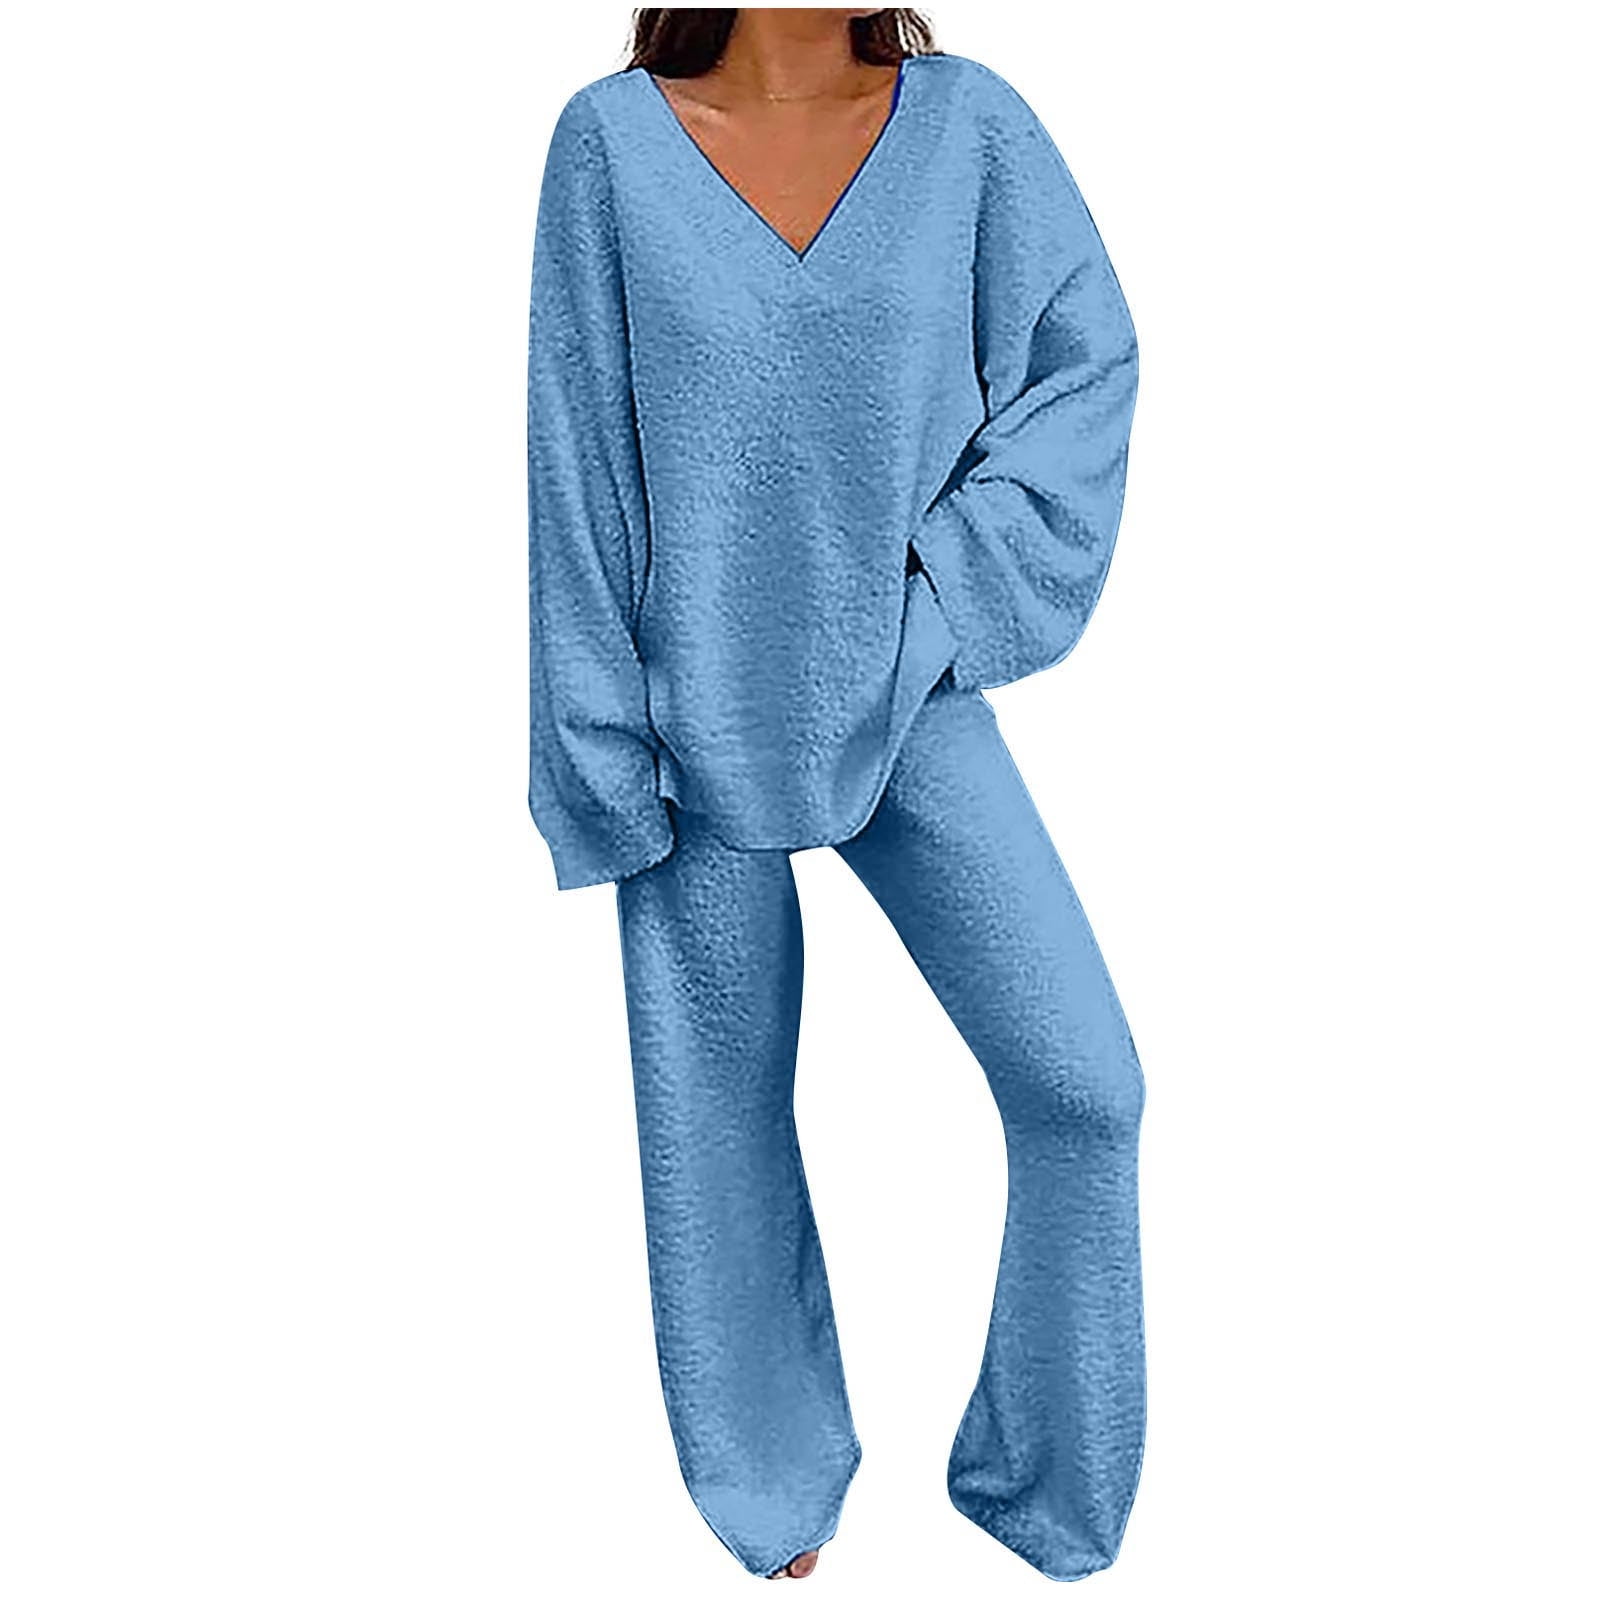 Velvet V Neck Pajama Set For Women Hot And Warm Lunya Sleepwear With Top  And Pants Big Size 201109 From Dou01, $13.43